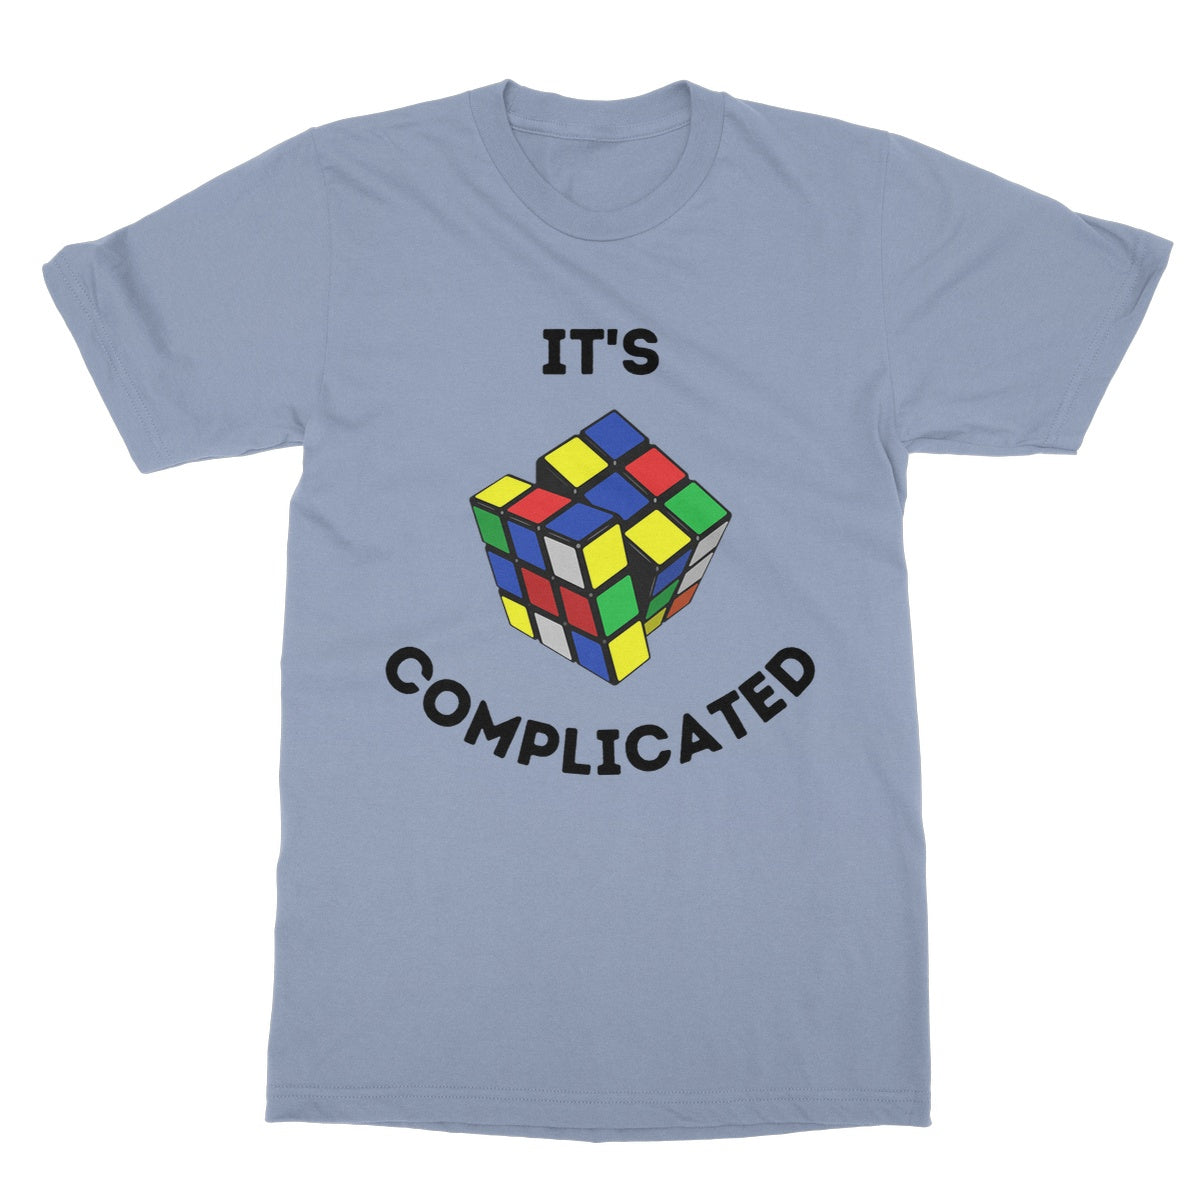 it's complicated t shirt blue